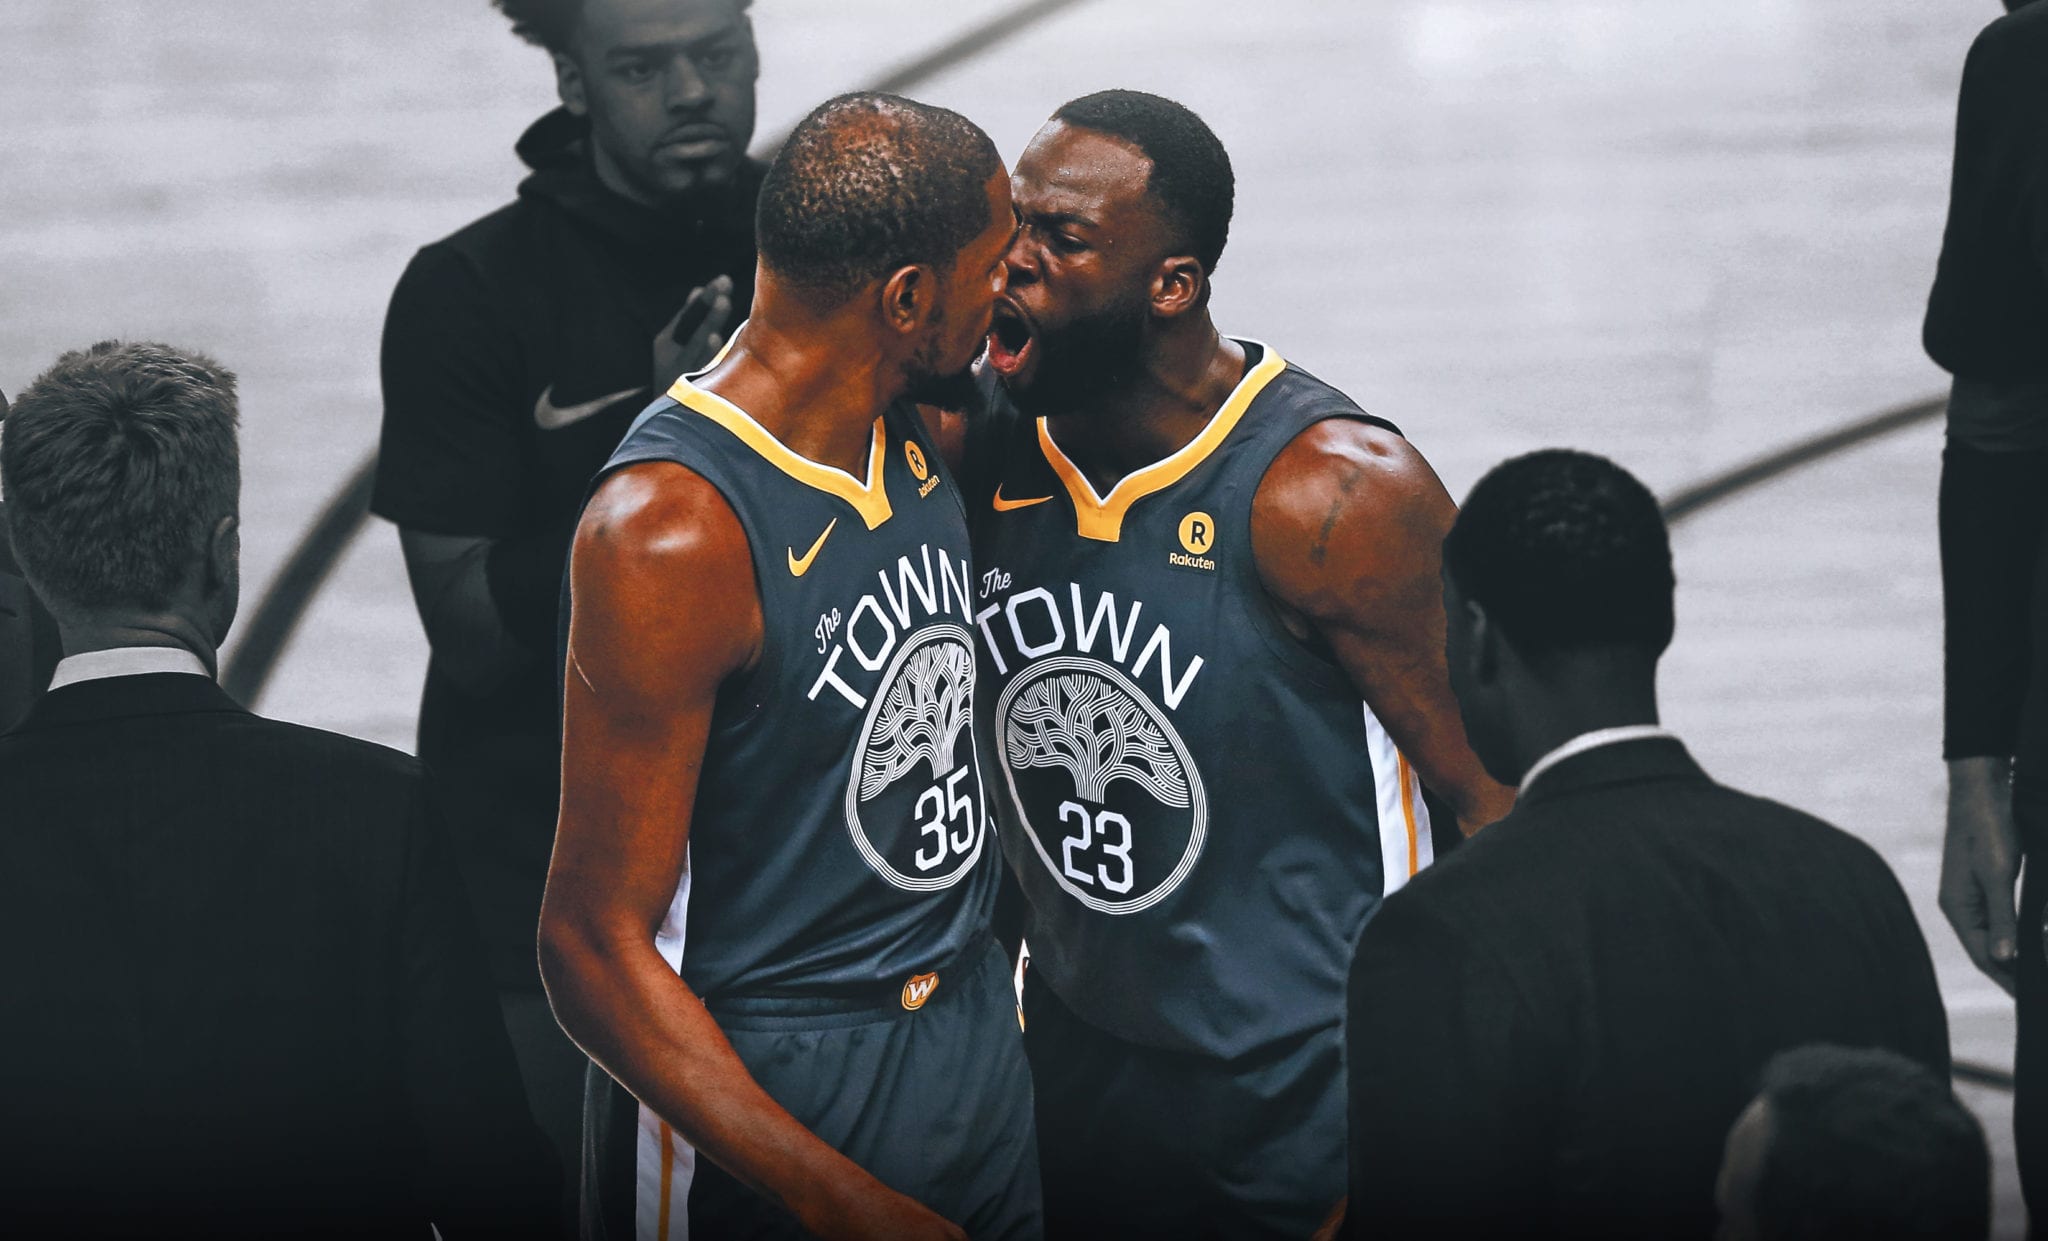 draymond green kevin durant fight